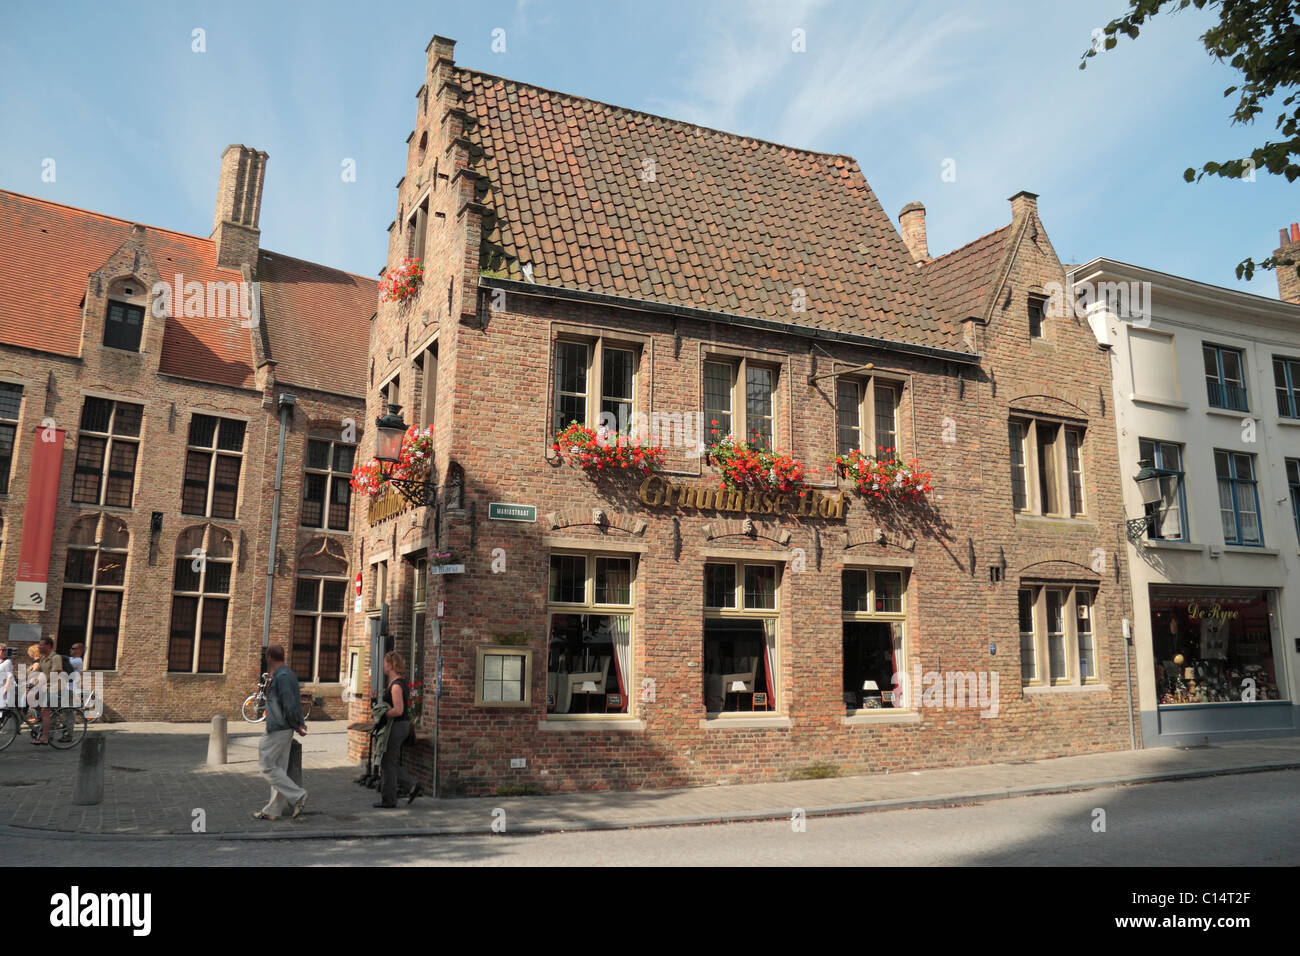 The highly rated and popular Gruuthuse Hof restaurant in the beautiful city of Bruges (Brugge), Belgium Stock Photo